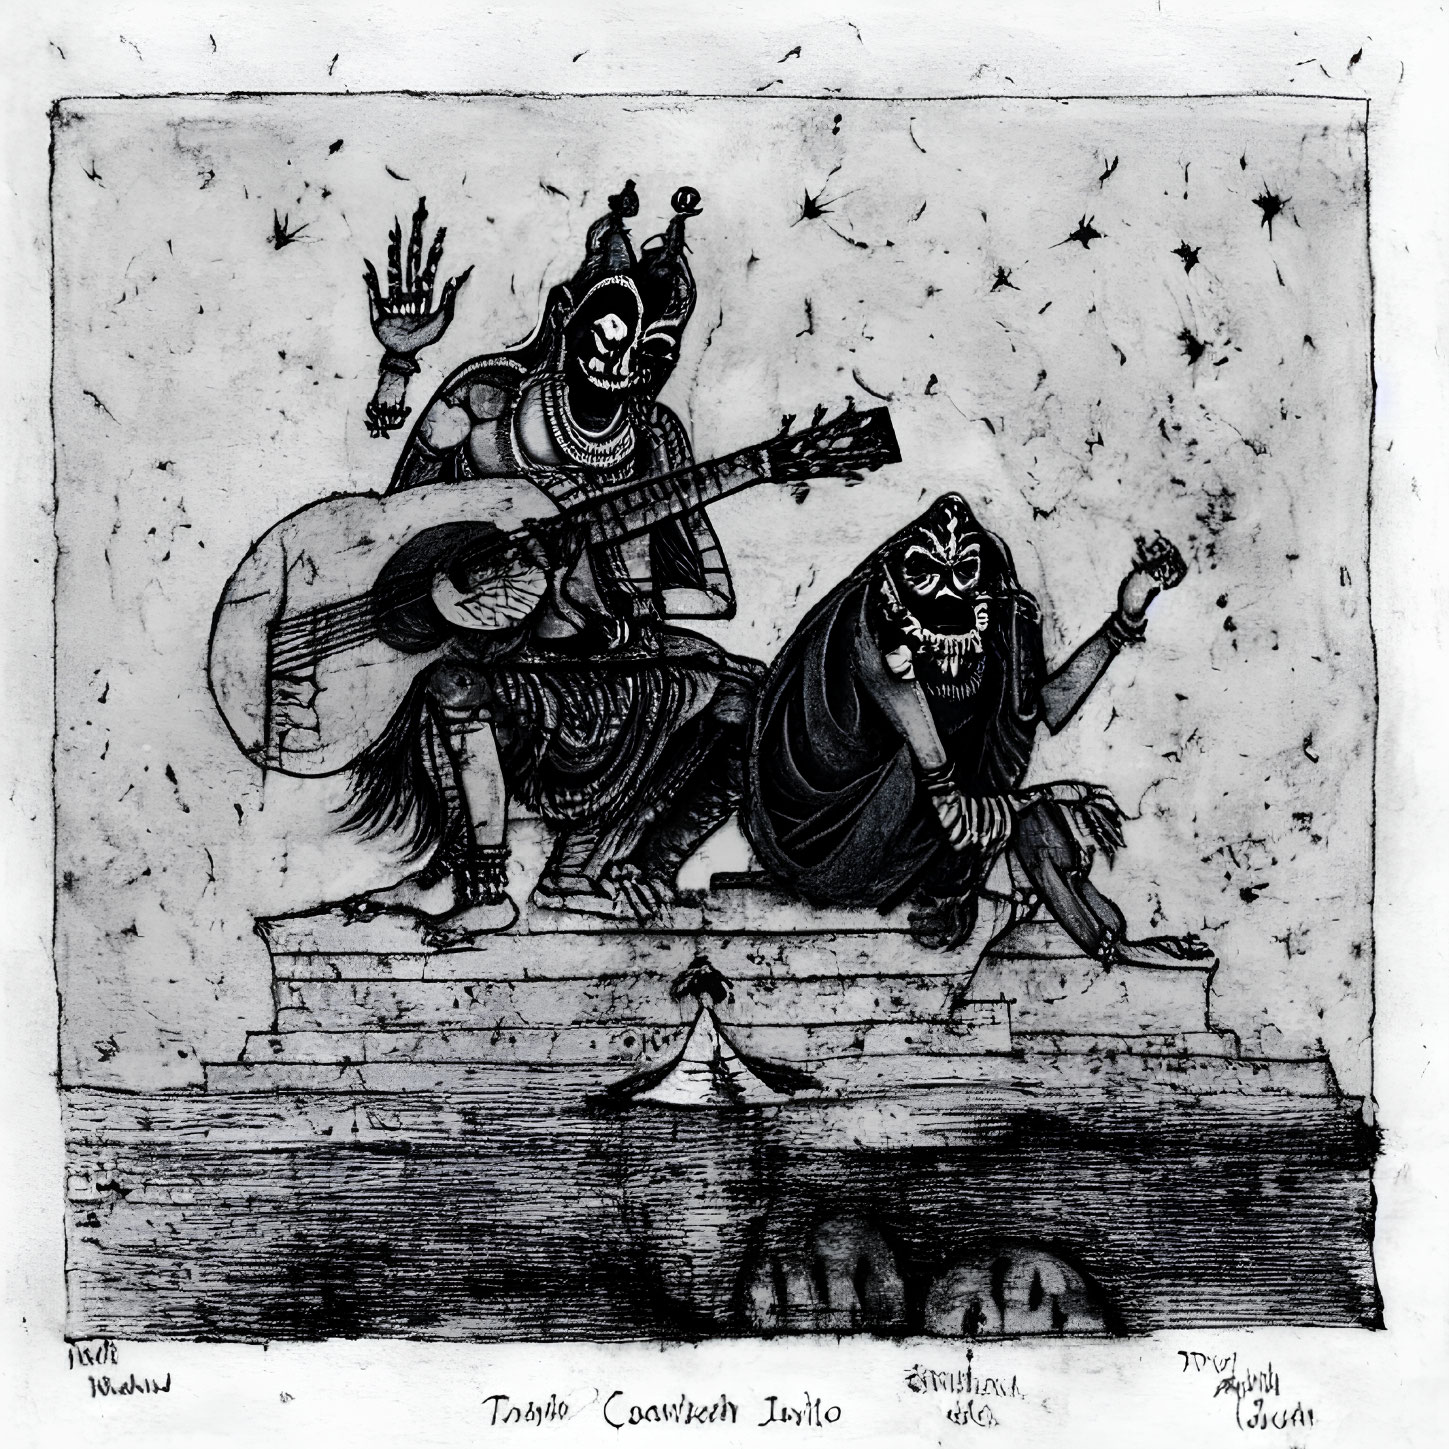 Monochrome illustration of two stylized figures with guitar and cloak on platform under starry sky